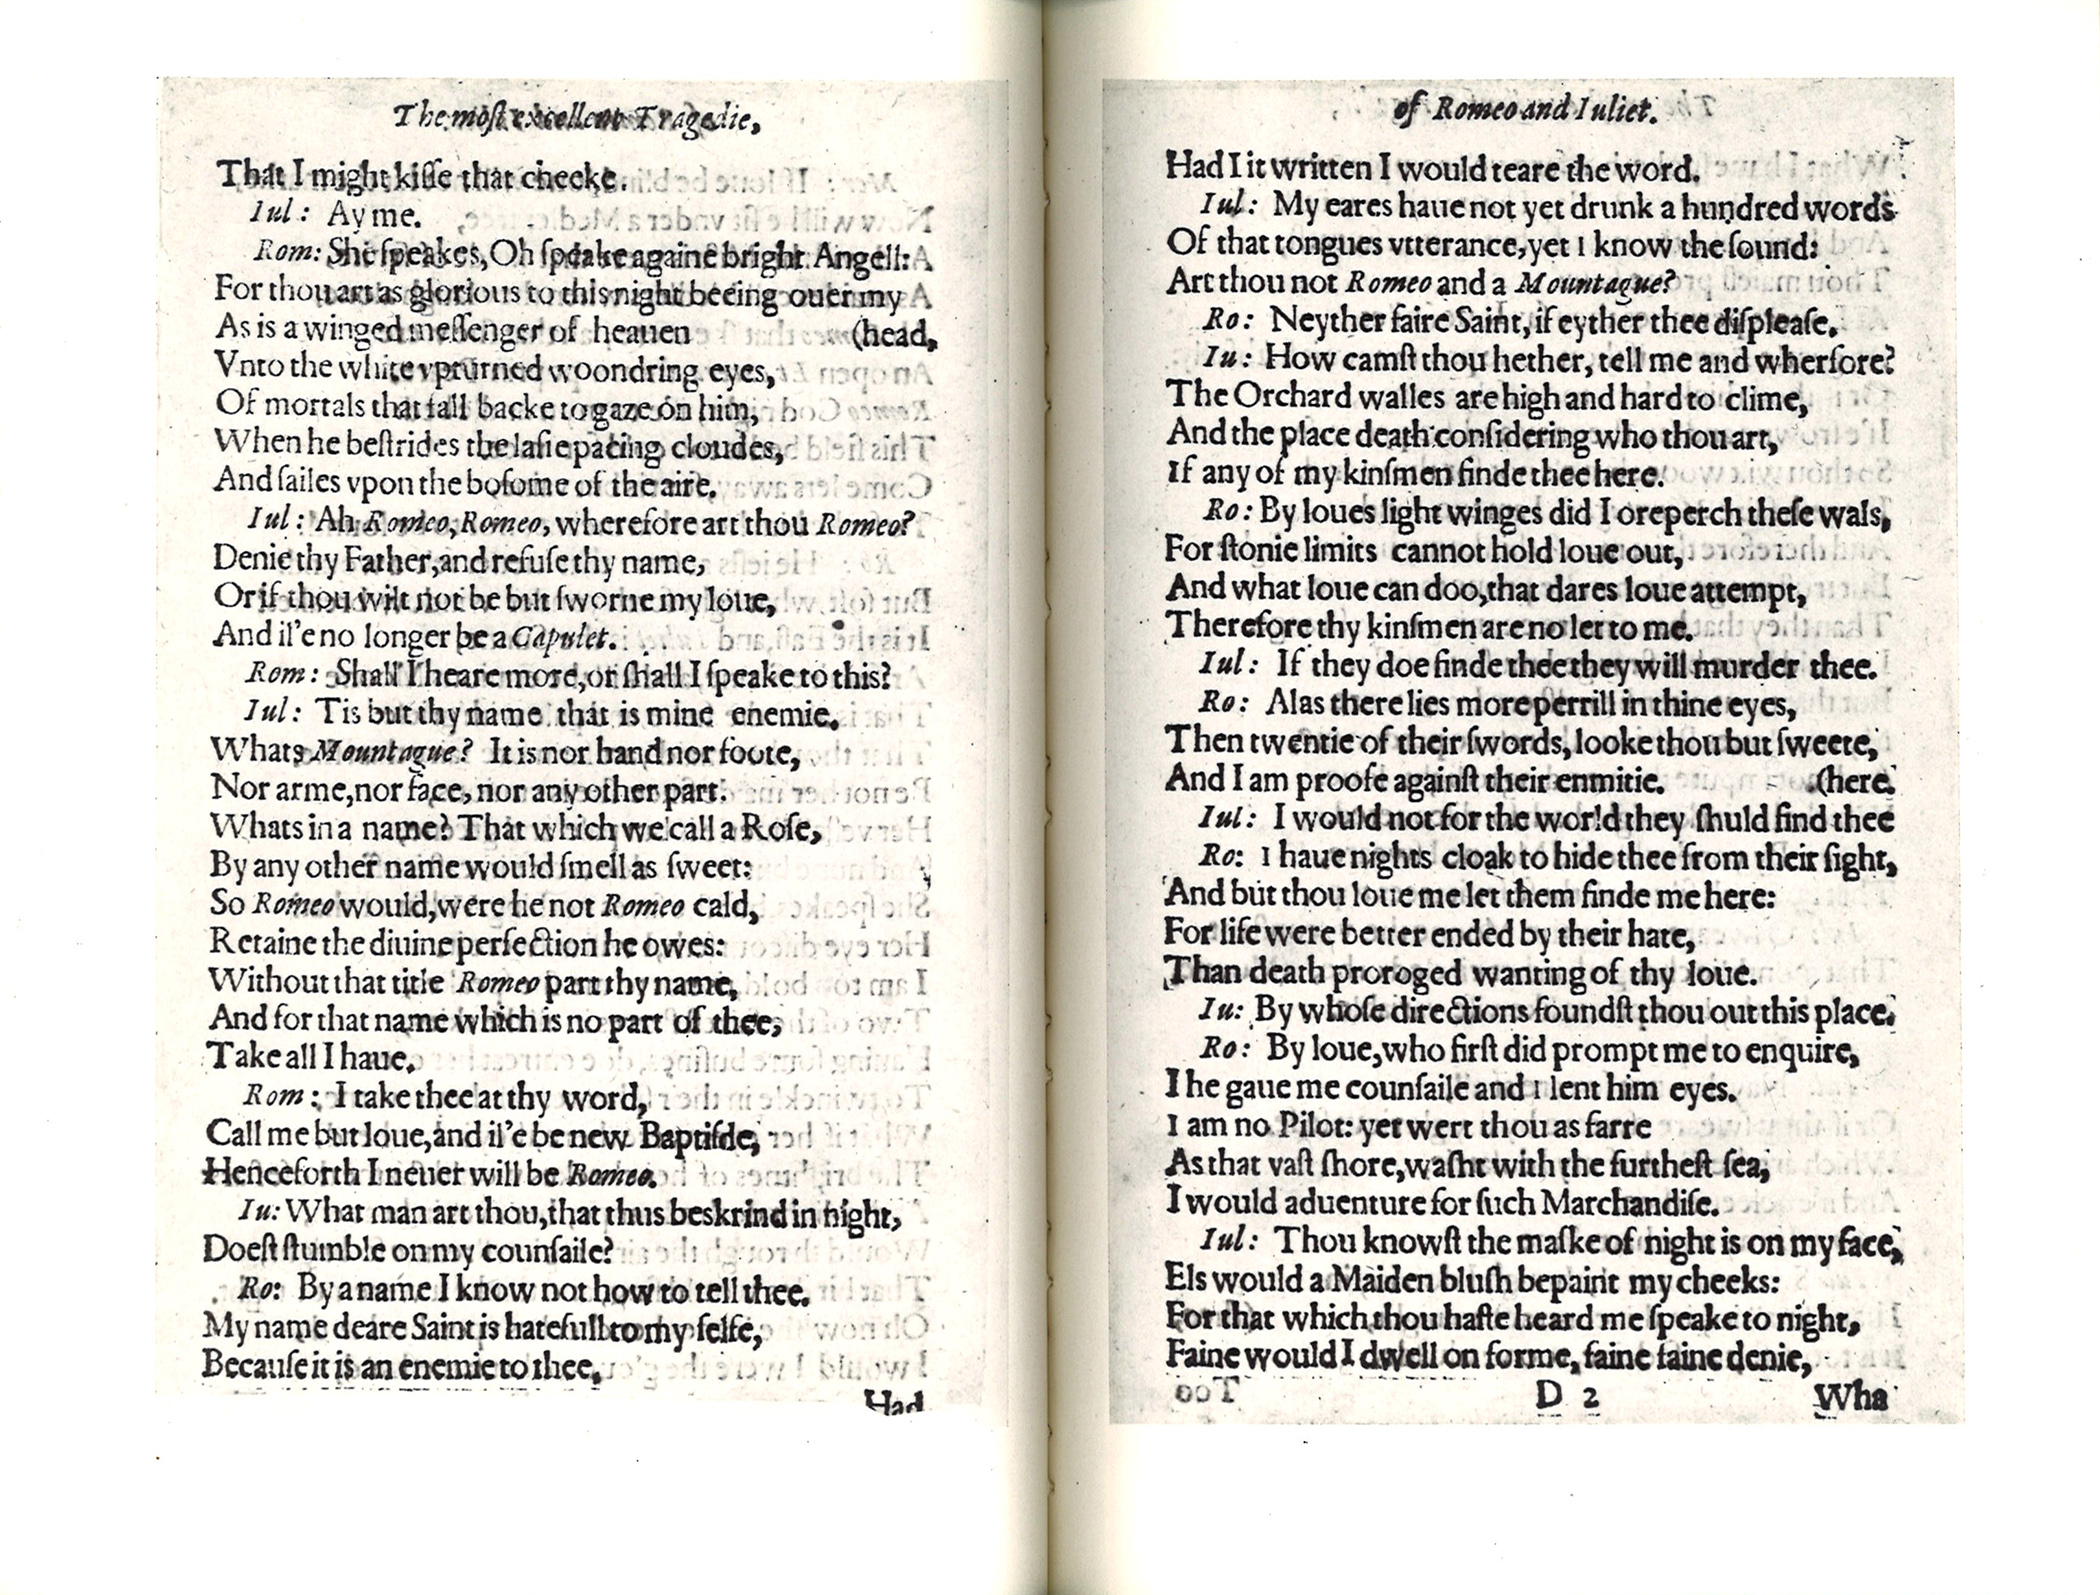 Page opening from facsimile of 1597 version of Shakespeare's Romeo and Julie